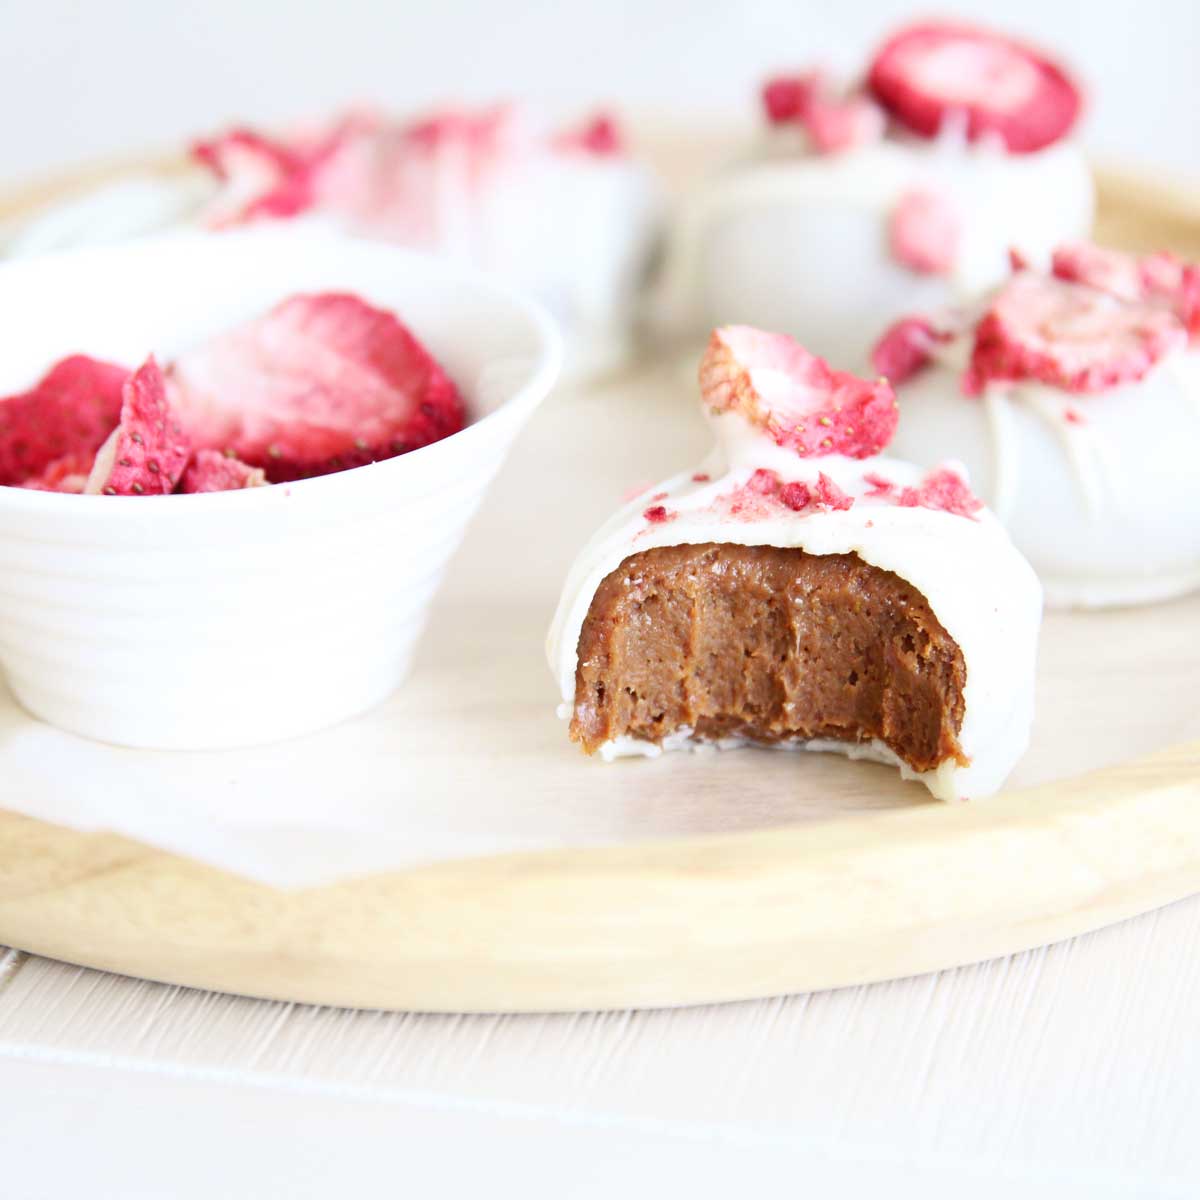 PB Fit Strawberry White Chocolate Easter Eggs - Carrot Swiss Roll Cake